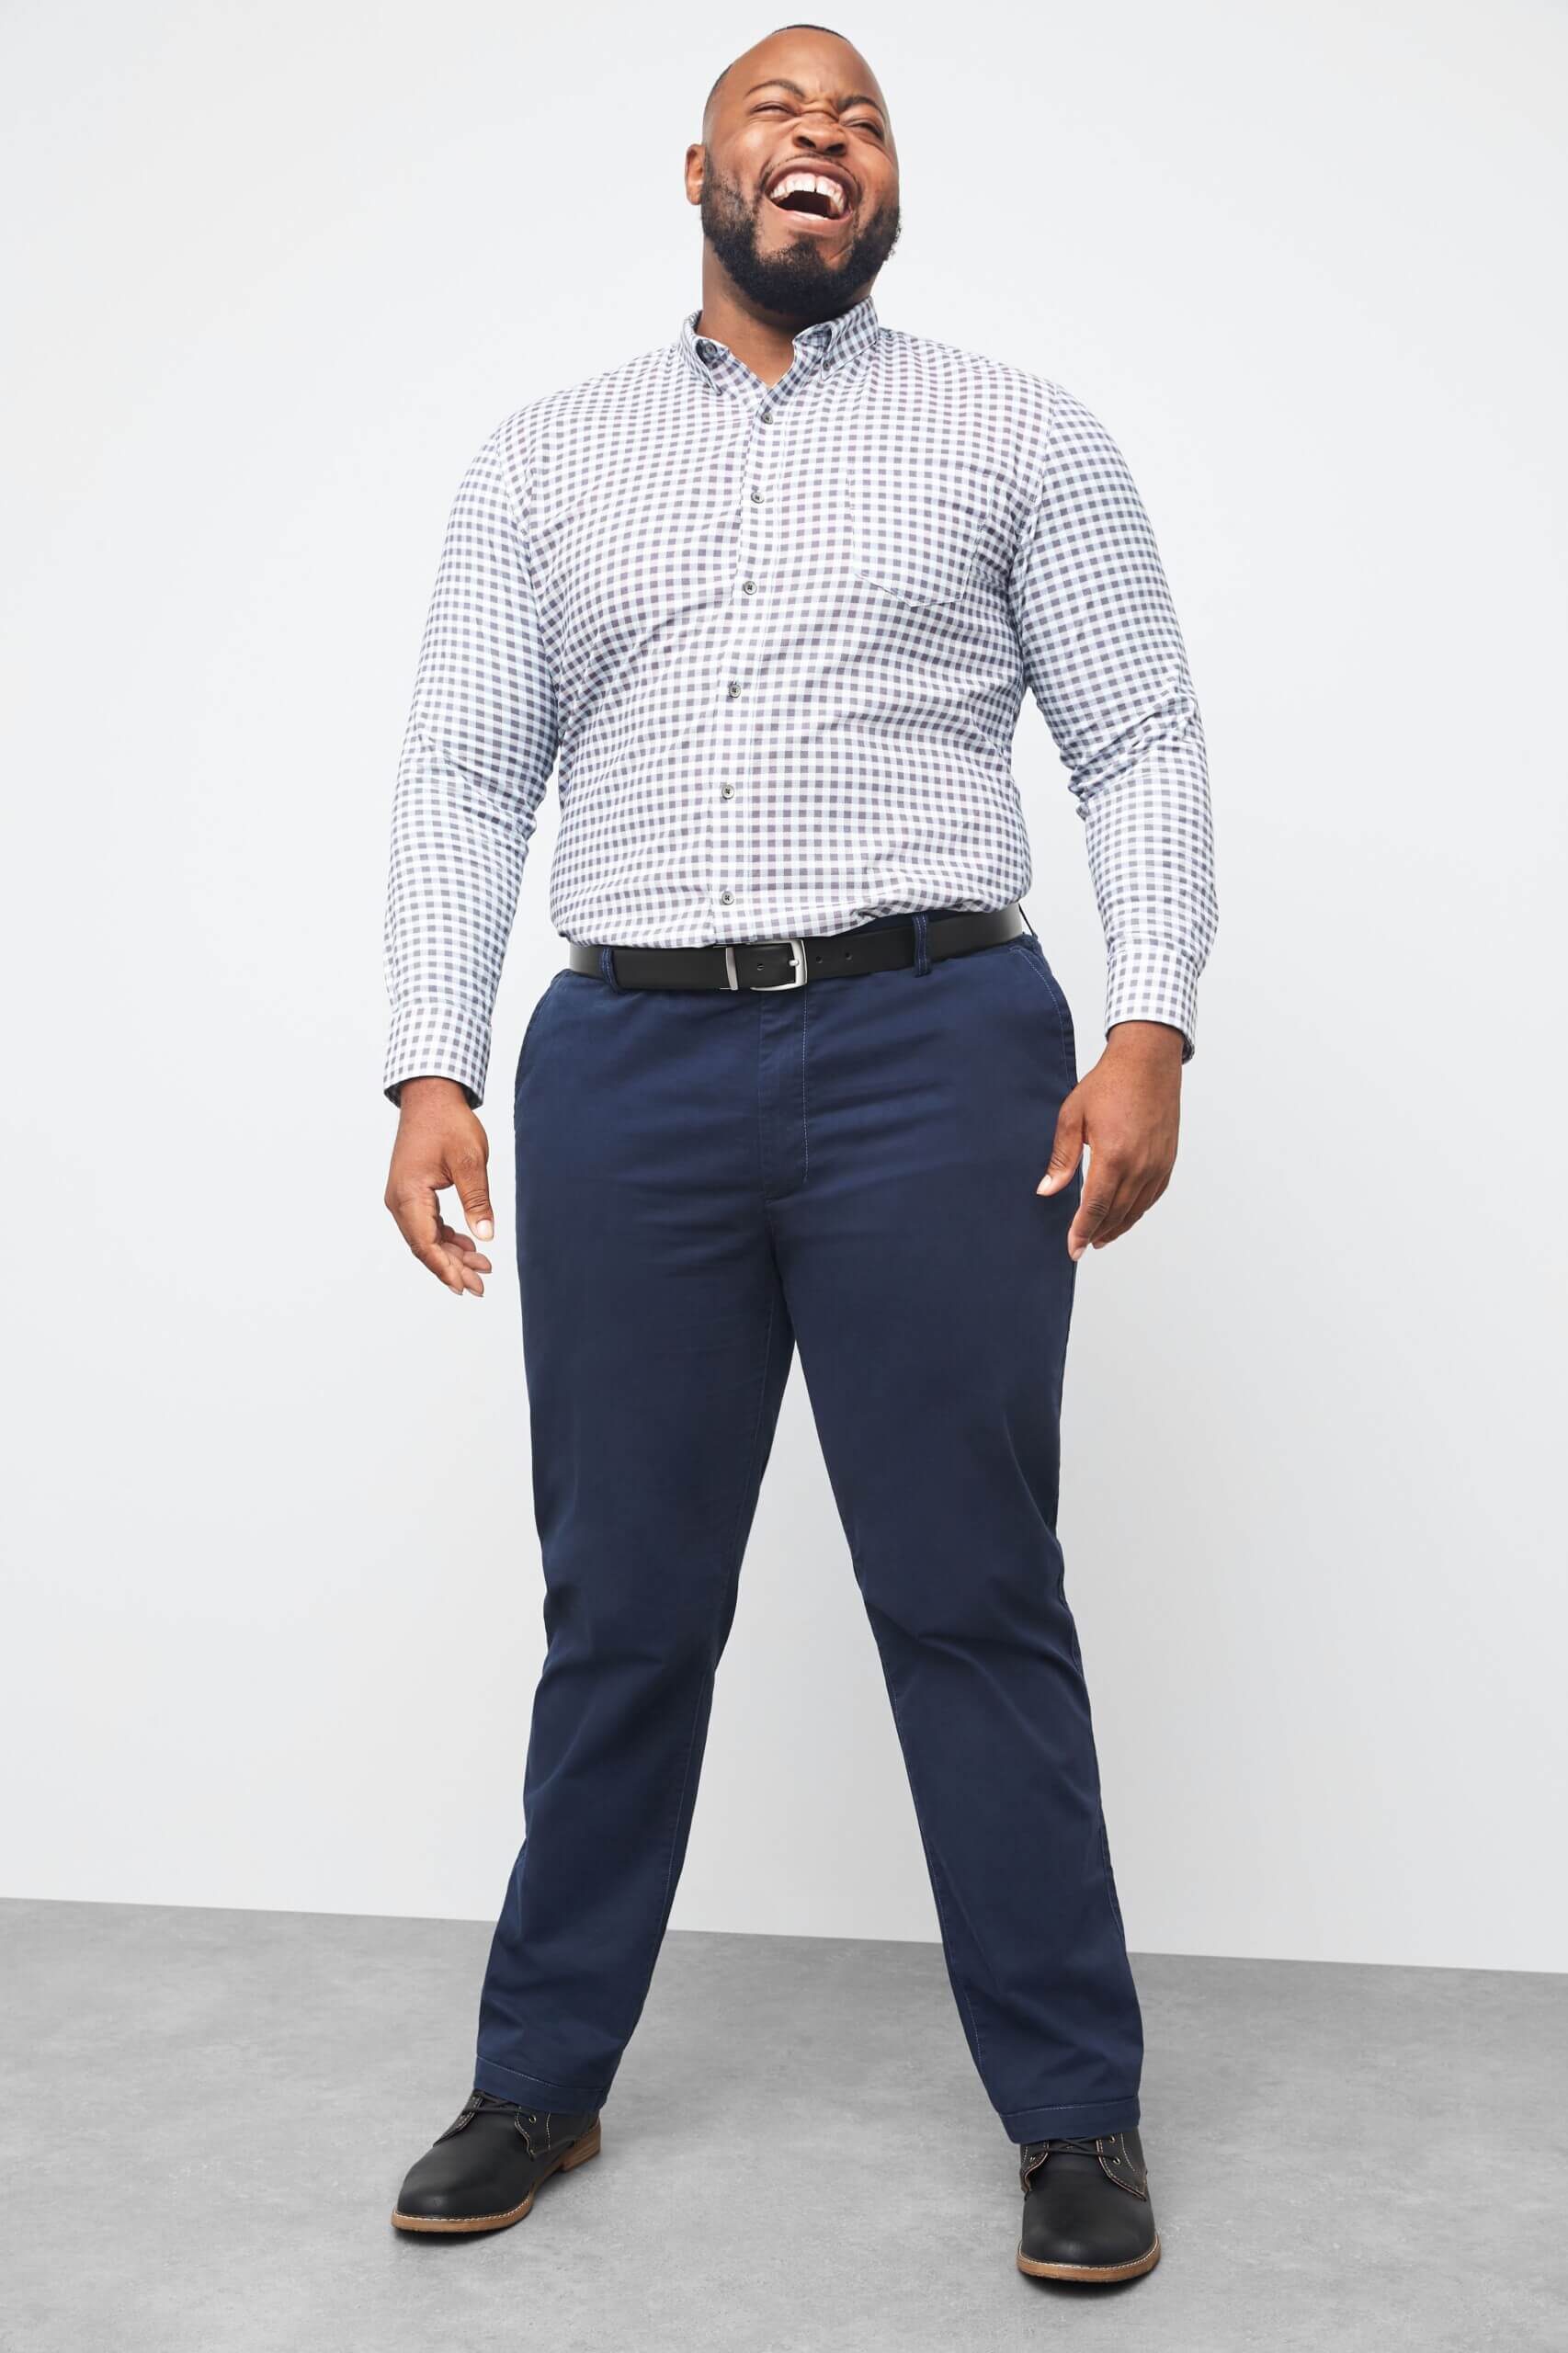 Big and Tall Men's Fashion Tips | The ...